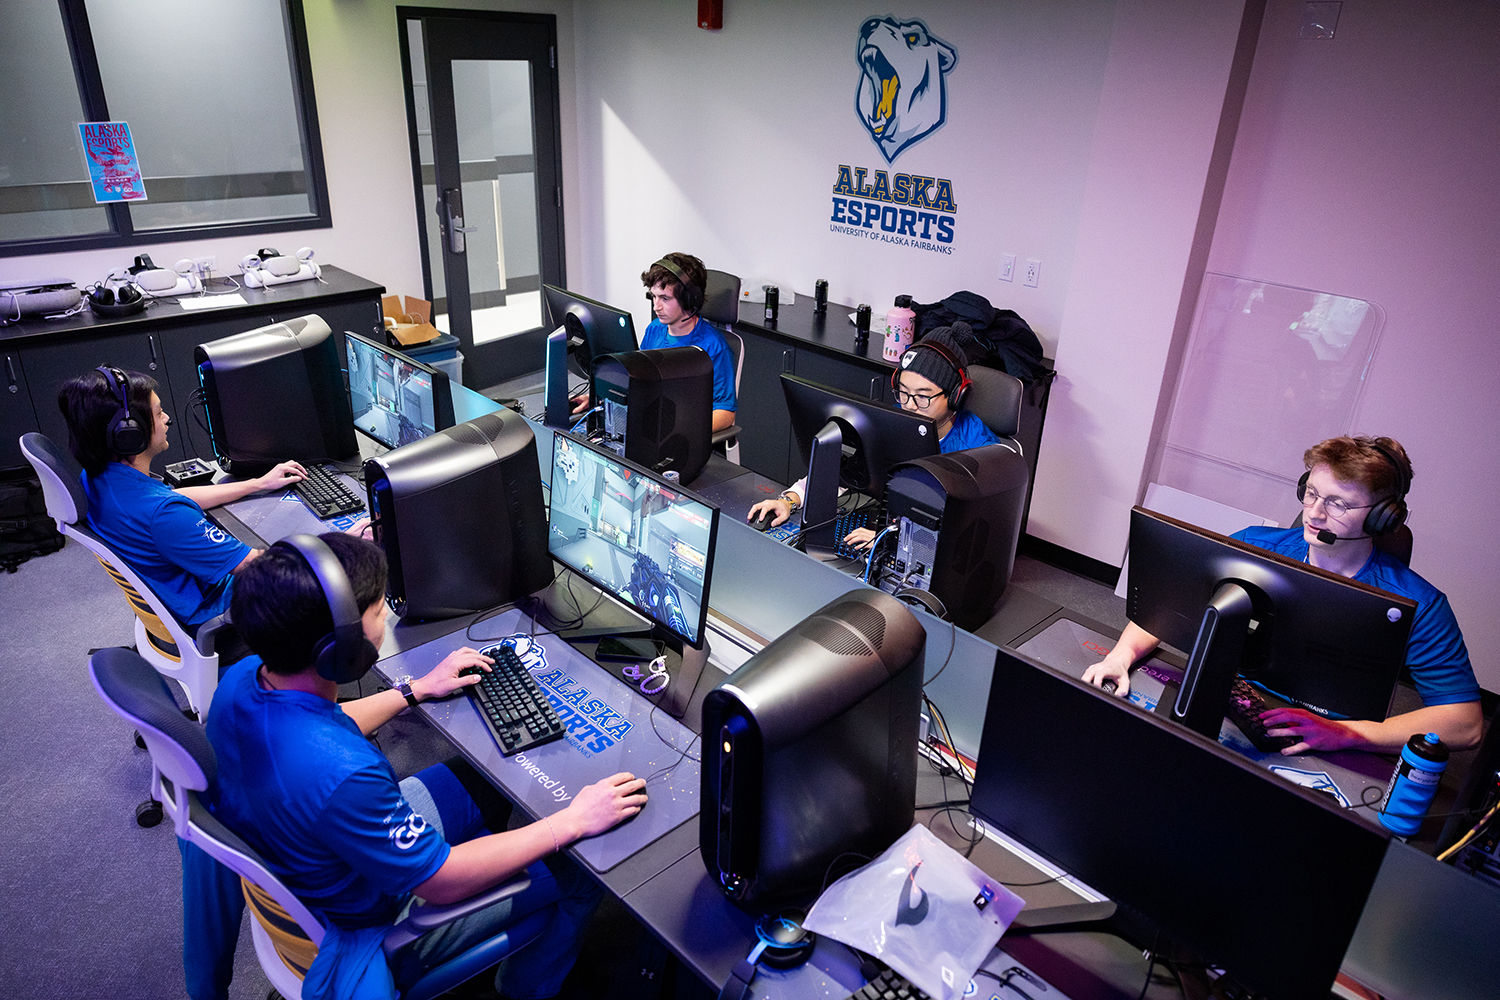 Nanook Esports Blue Team competes in a game of Valorant at the Alaska Esports Center.